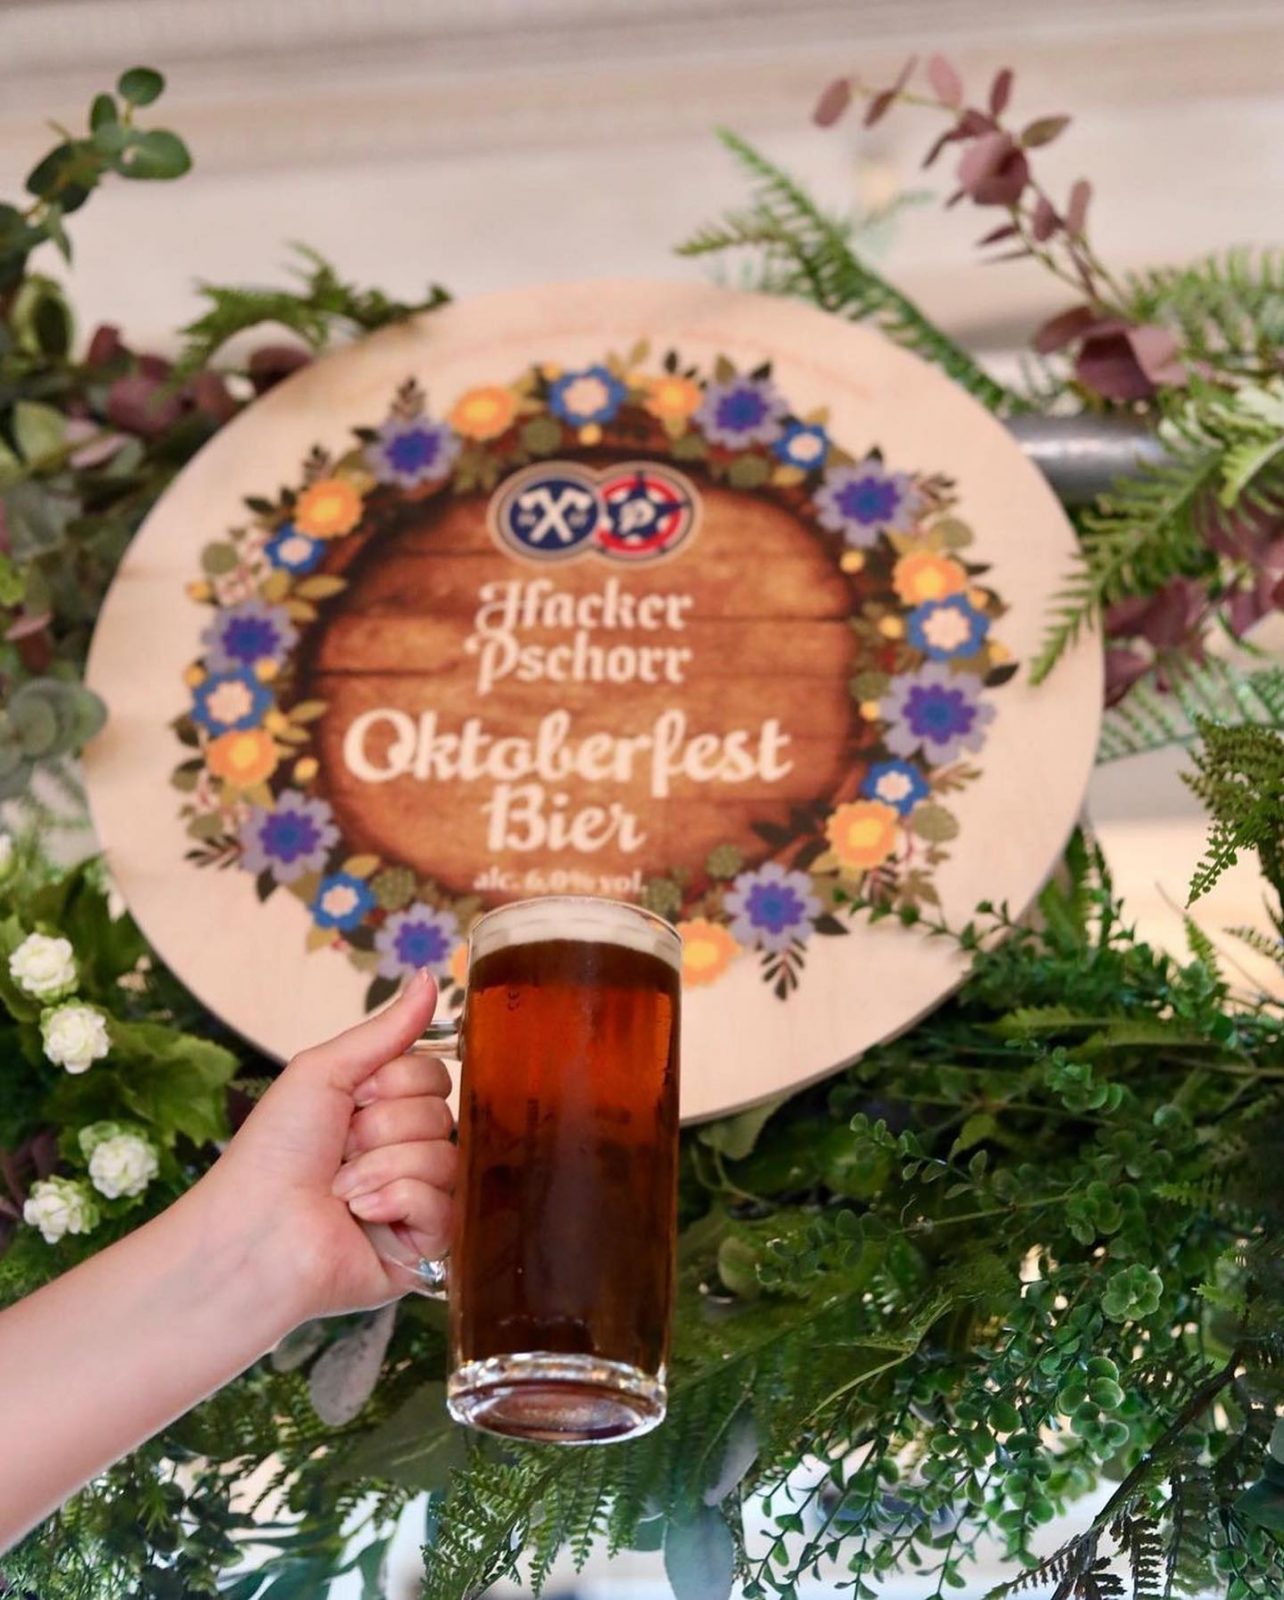 Oktoberfest is returning to Albert&#8217;s Schloss with flowing beer and a famous Manc, The Manc